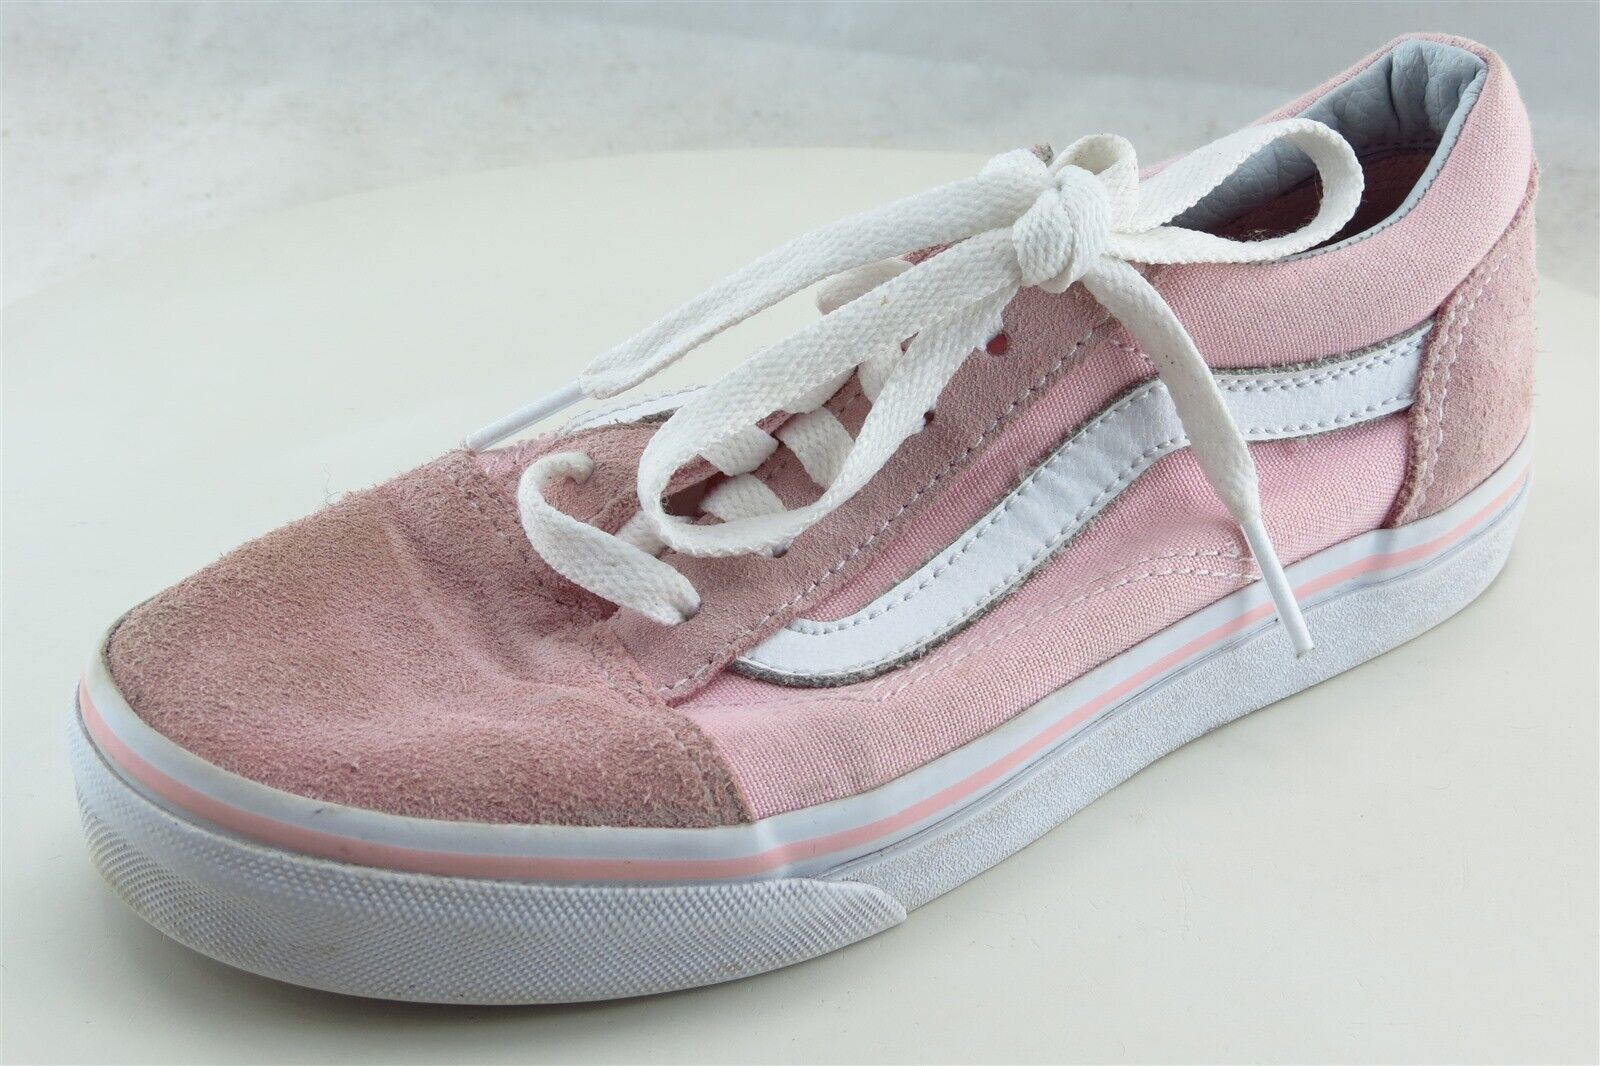 Primary image for VANS Pink Fabric Casual Shoes Girls Shoes Size 3